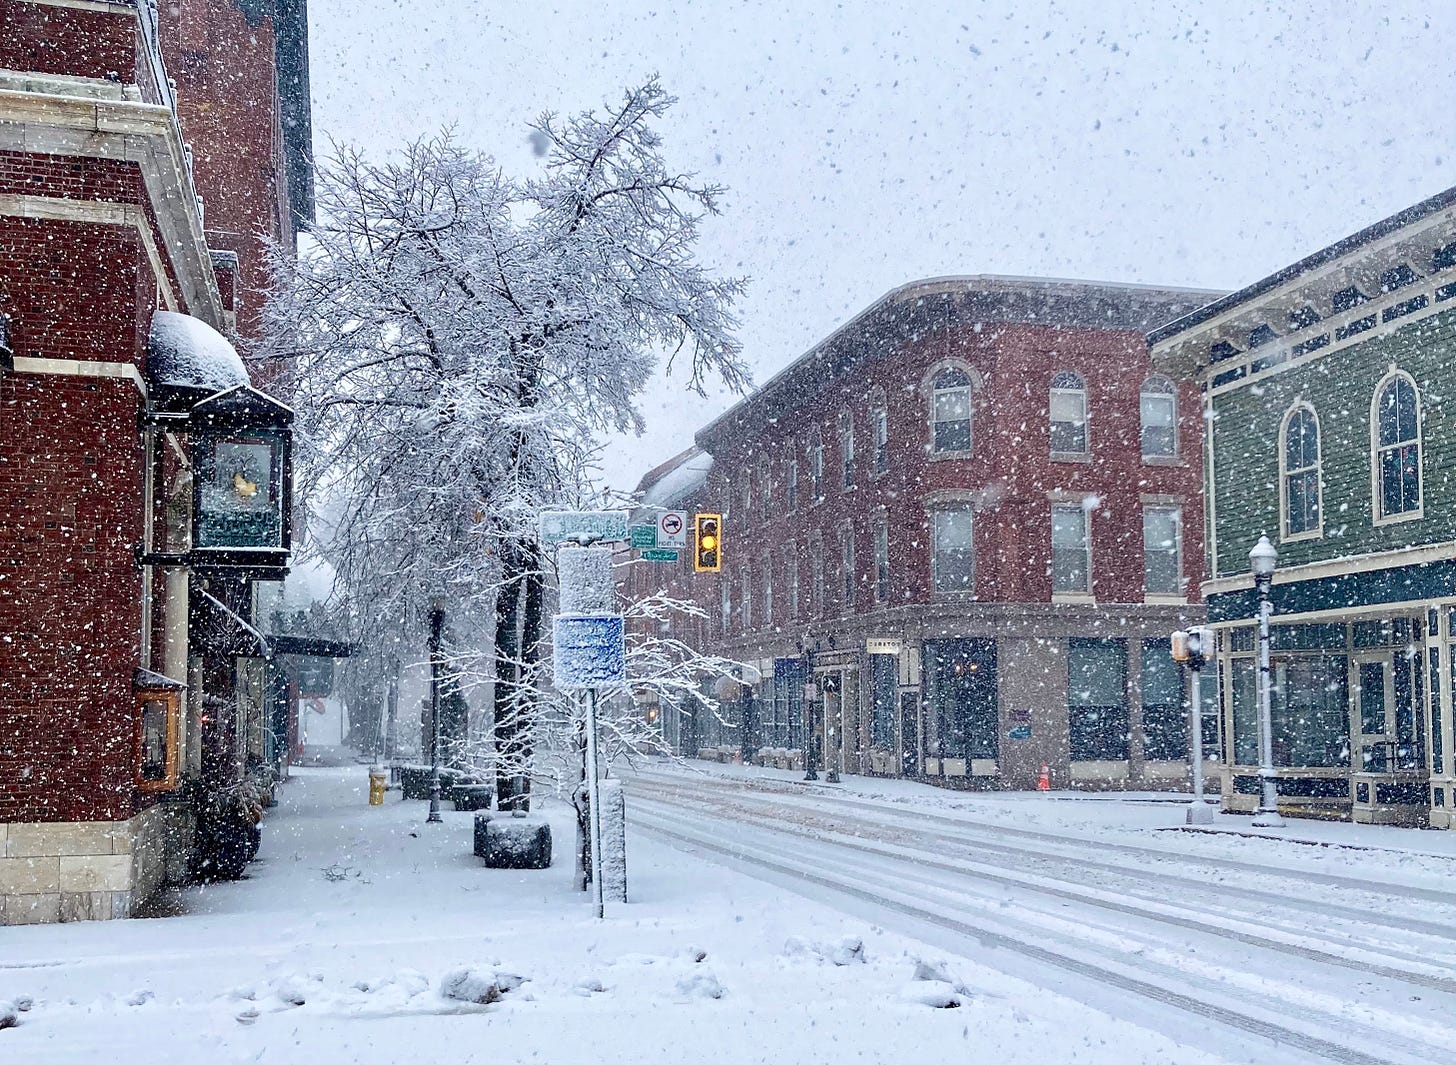 Two brick buildings and a green wooden building at a snowing intersection. Heavy snow hangs in trees and completely coats street signs. 